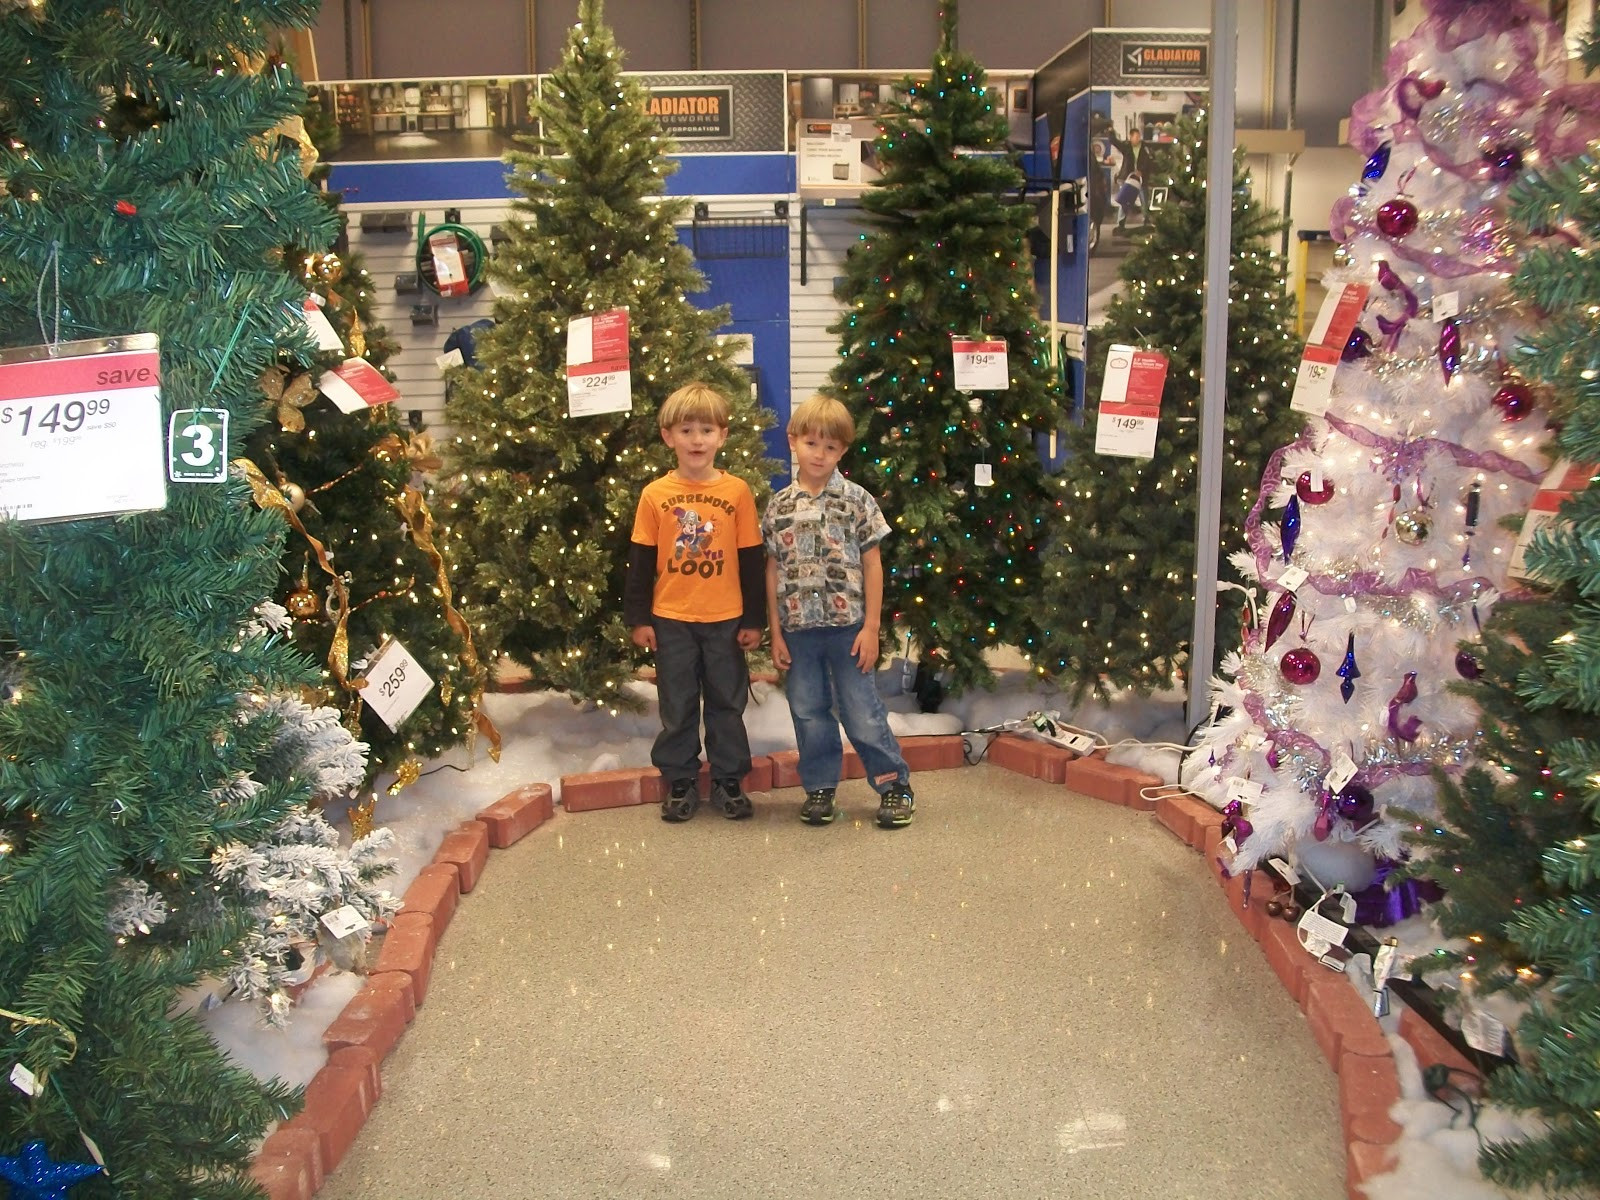 Sear Outdoor Christmas Decorations
 My boys were excited to look at Christmas trees and